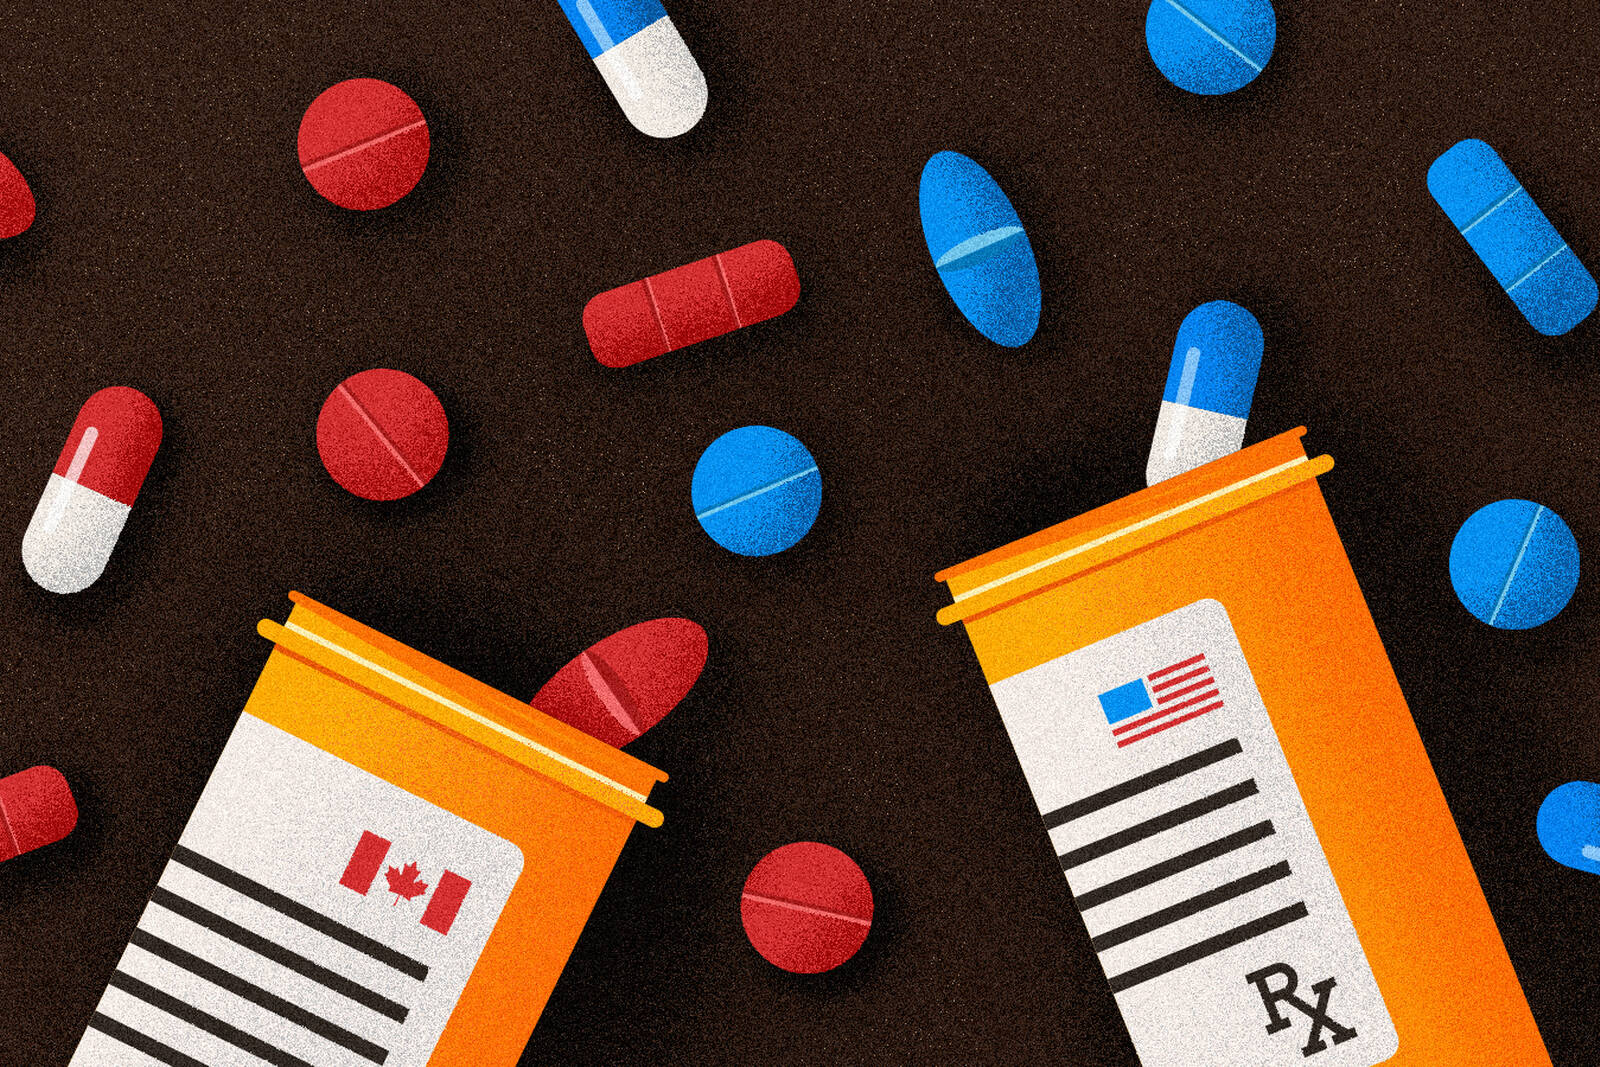 Researchers examine why prescription drug prices and labor costs are lower in Canada than the U.S.